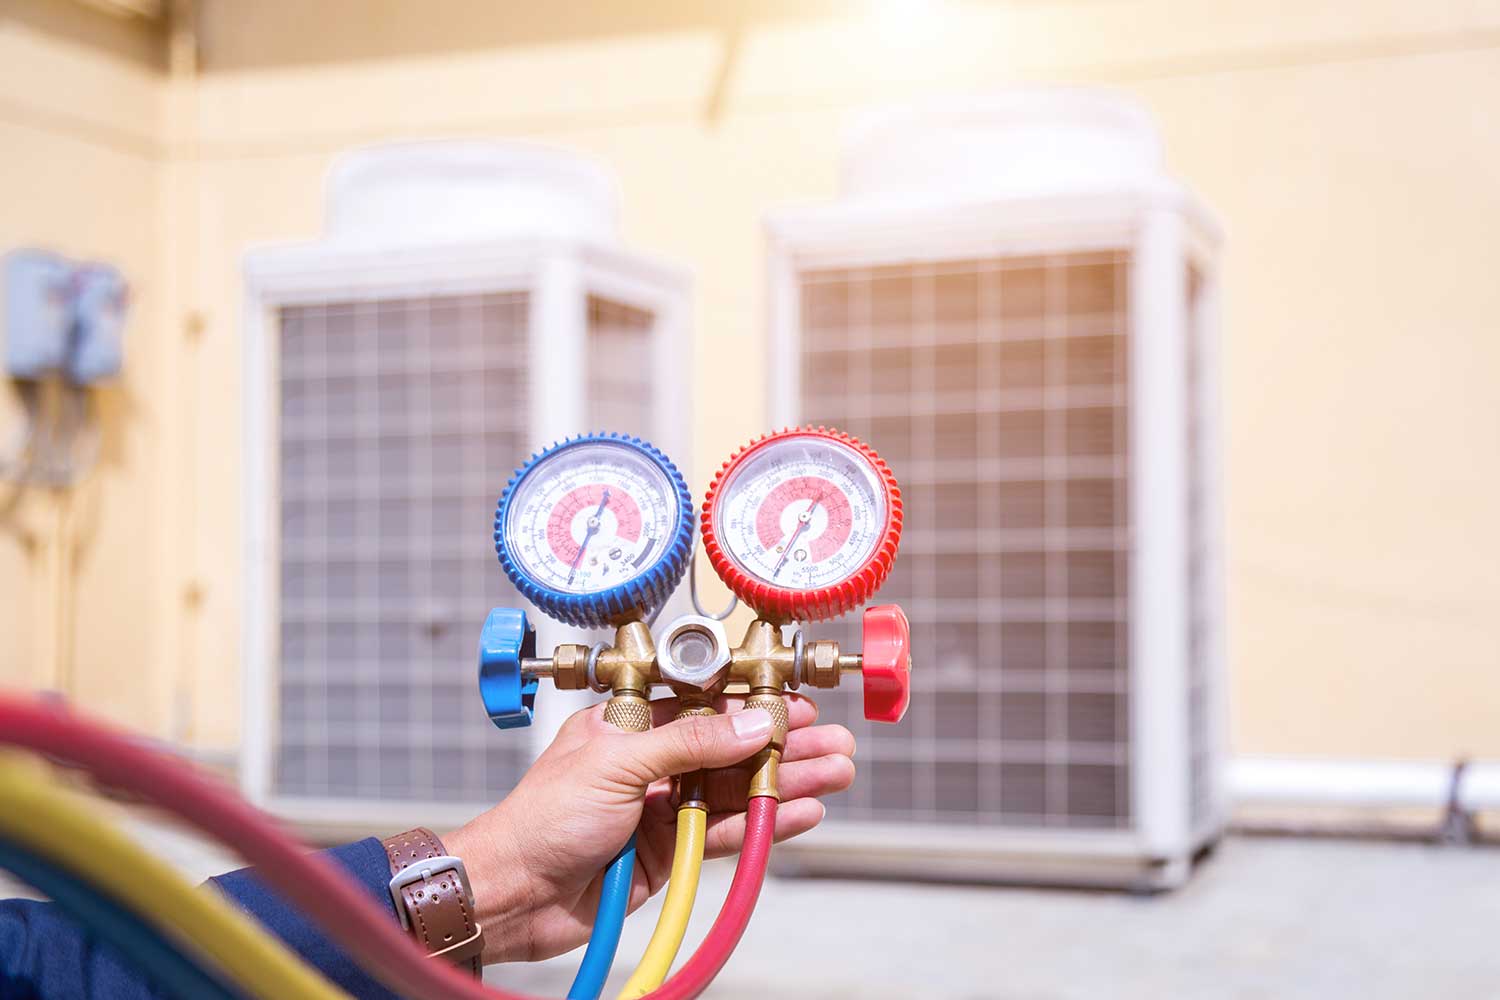 We needed an Heating plus A/C specialist in Roselle, IL